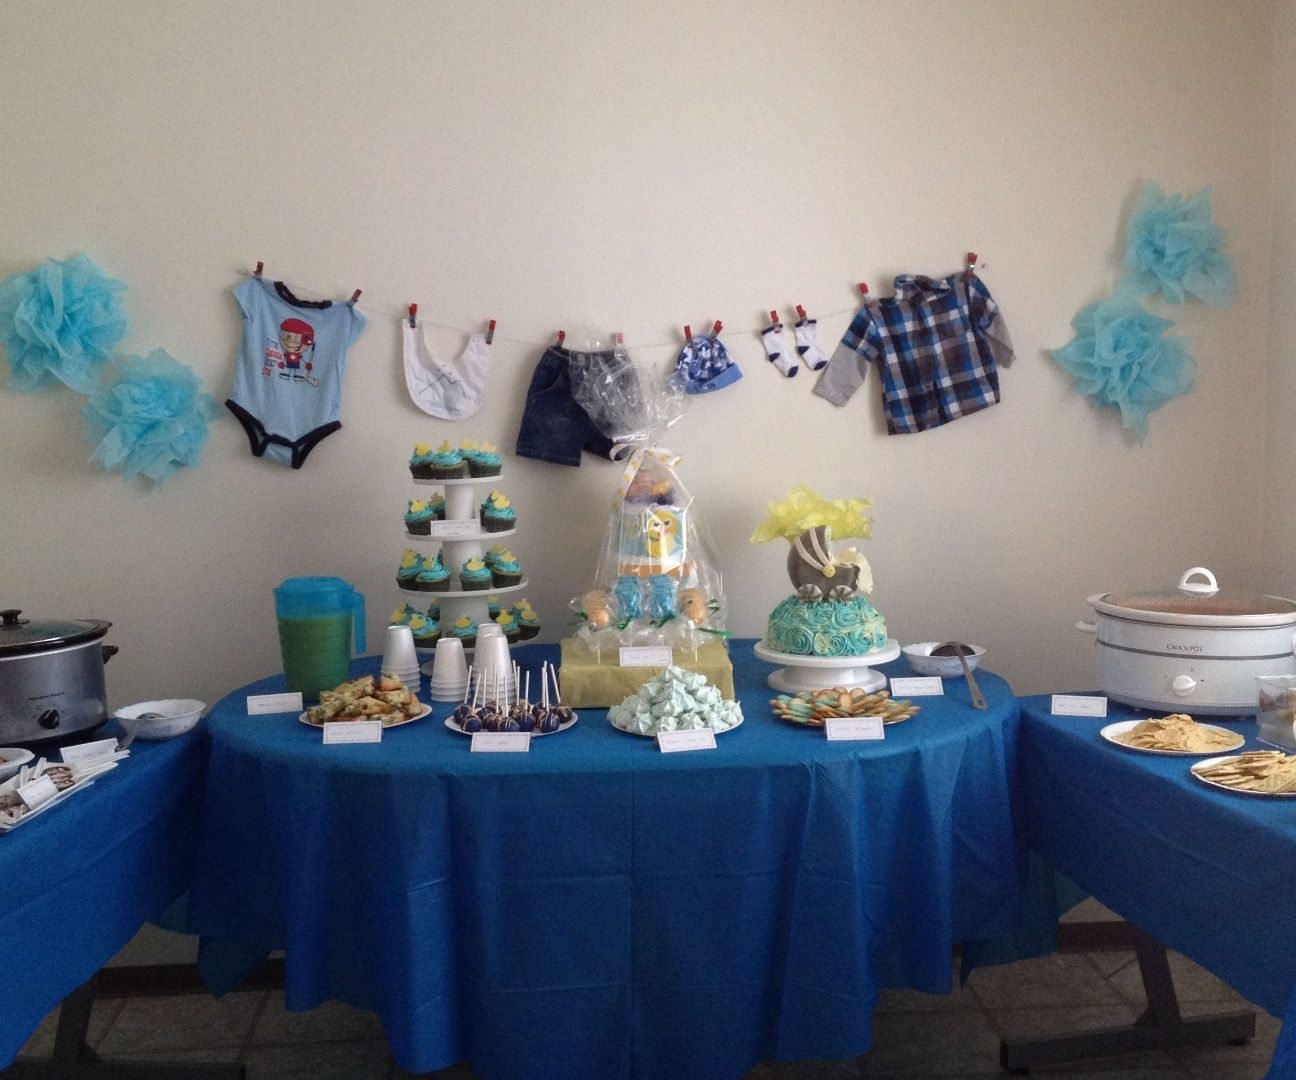 10 Pretty Candy Table Ideas For Baby Shower formidable baby shower candy table ideas sweet for lovely decoration 2022